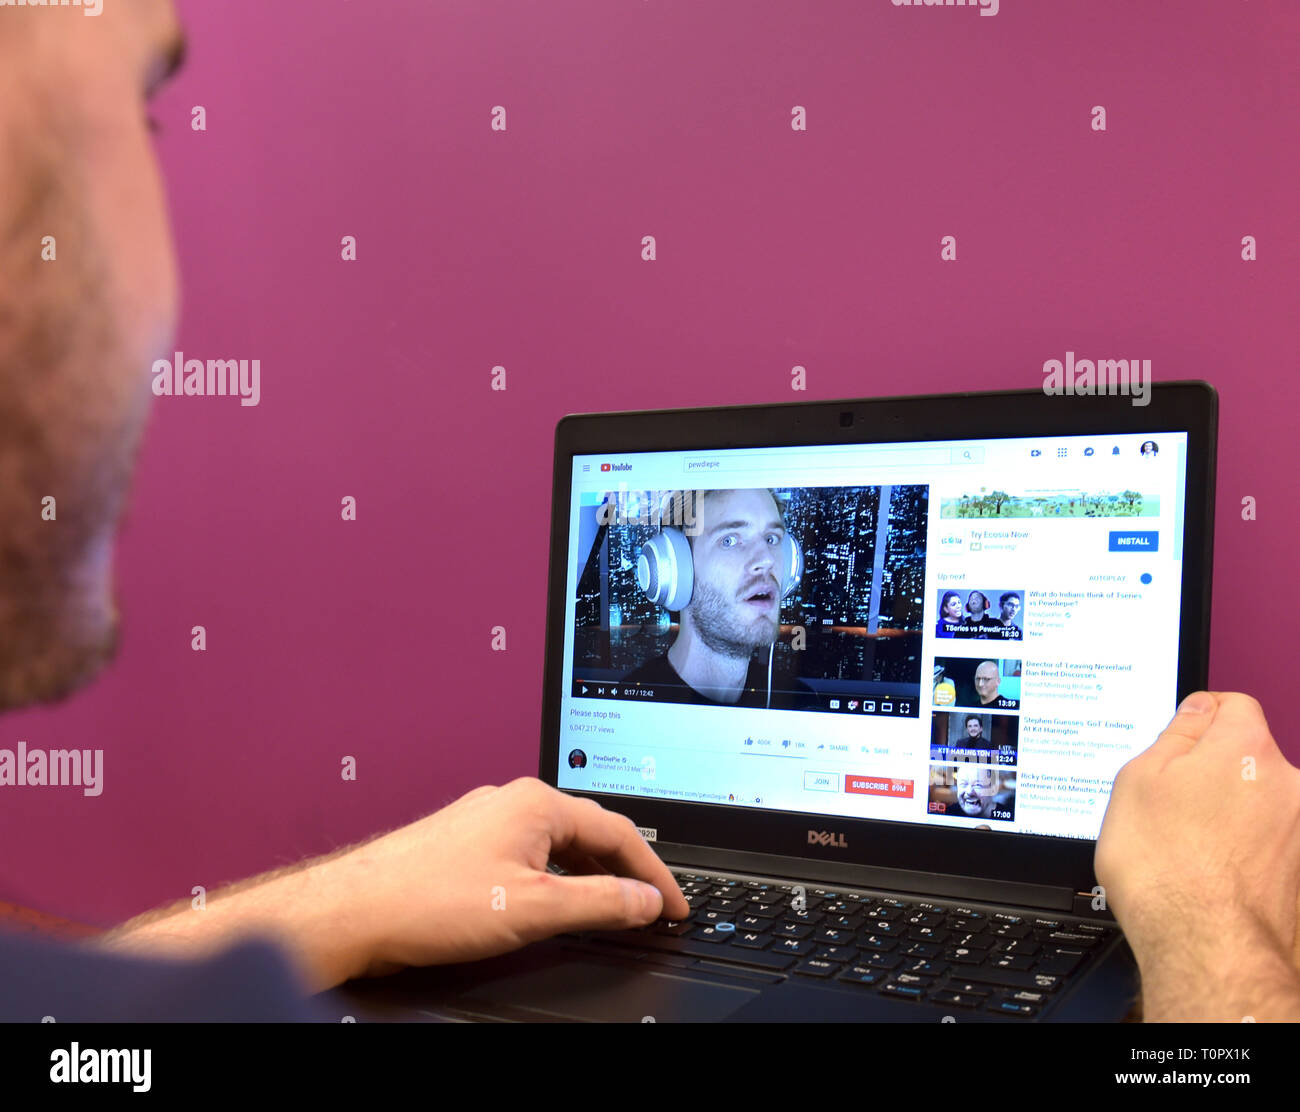 Stock photo of a page from Swedish YouTuber, Felix Kjellberg, known online as PewDiePie, displayed on YouTube displayed on a laptop computer. Stock Photo